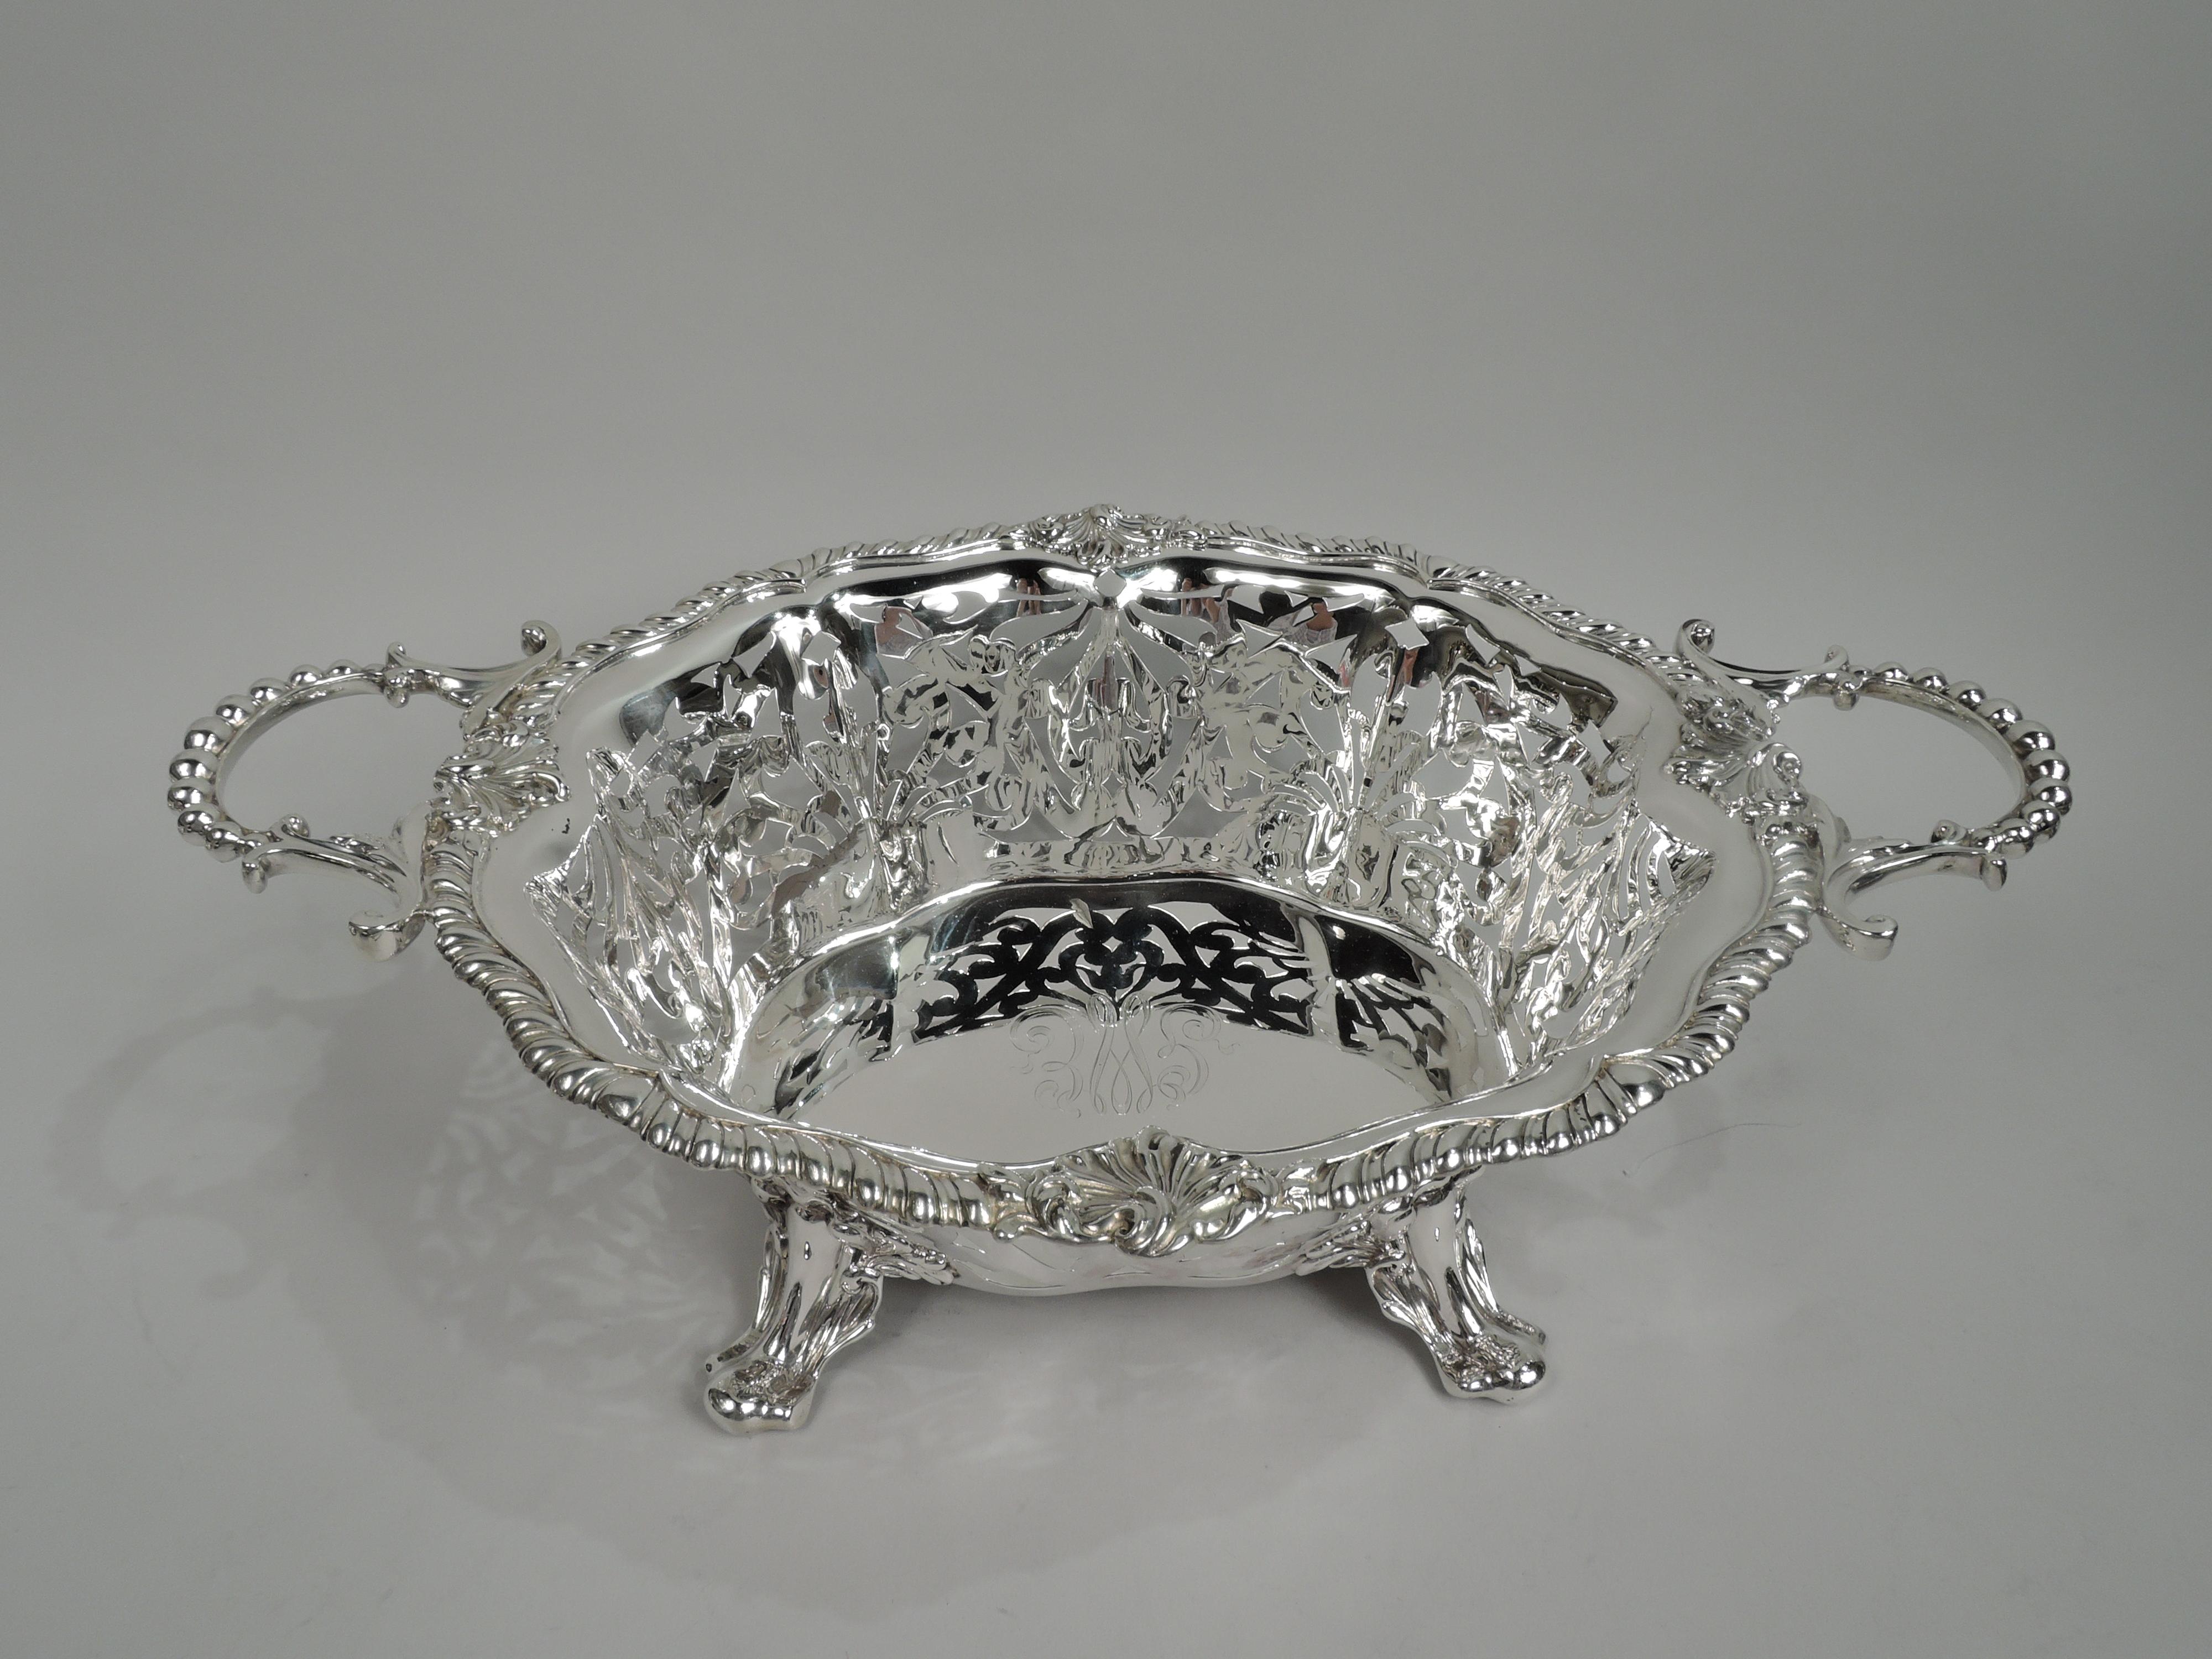 Edwardian Classical sterling silver bowl. Made by Shreve, Crump & Low Co. in Boston, ca 1890. Solid and shaped well lobed and tapering sides with leafing, flowering, and scrolling openwork. Gadrooned serpentine rim interspersed with scallop shells.